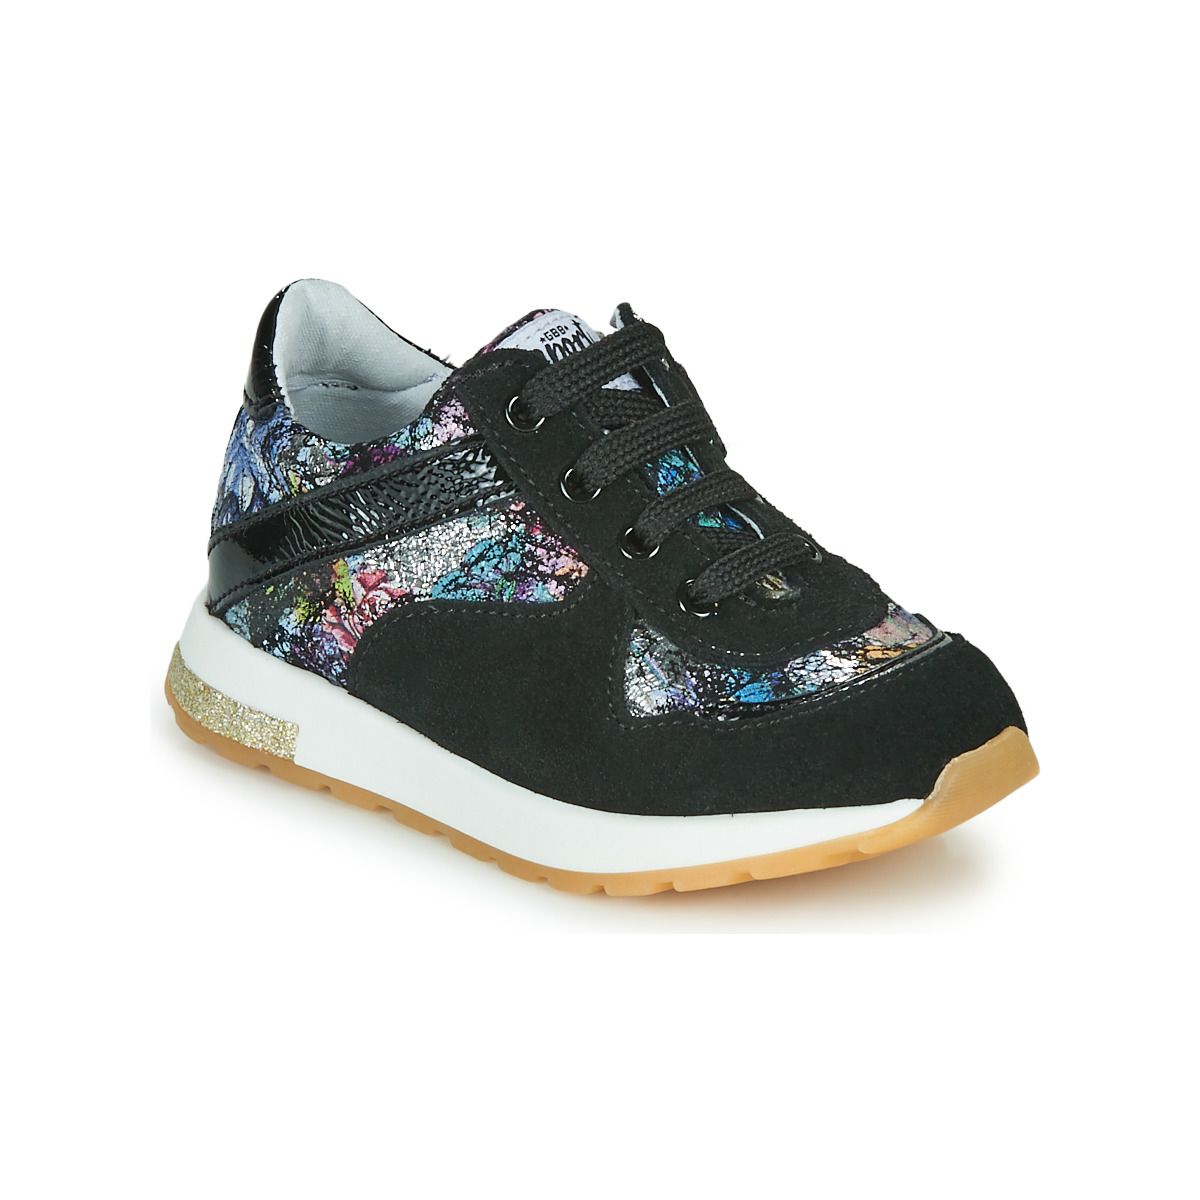 Chaussures Fille New Zealand Auck LELIA Multicolore